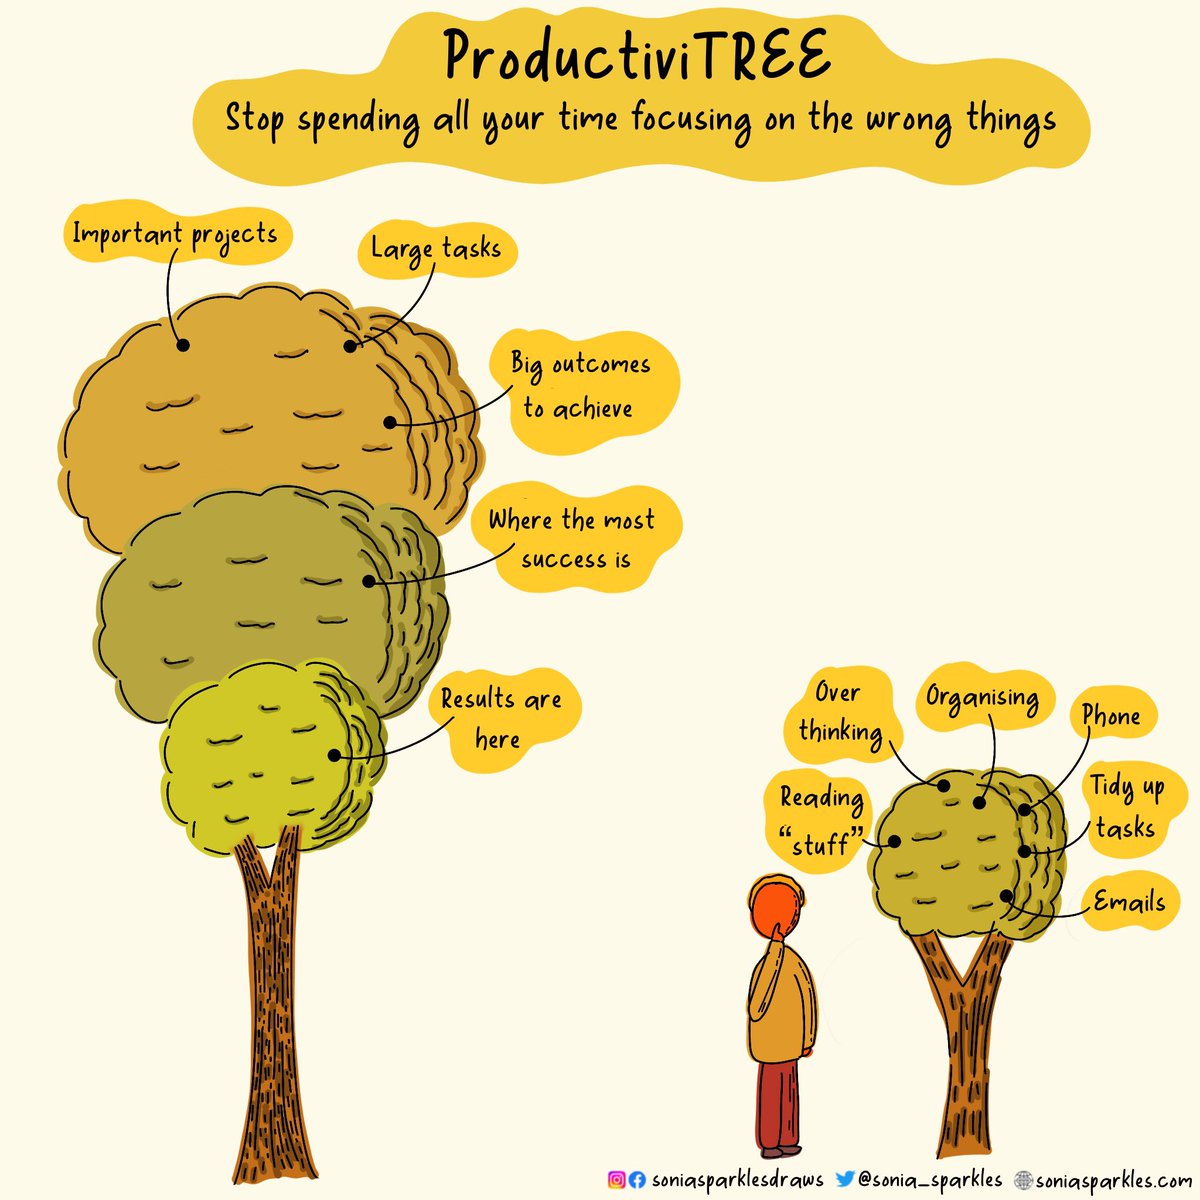 New doodle- Productivity tree: Stop spending all your time focusing on the wrong things 🌳